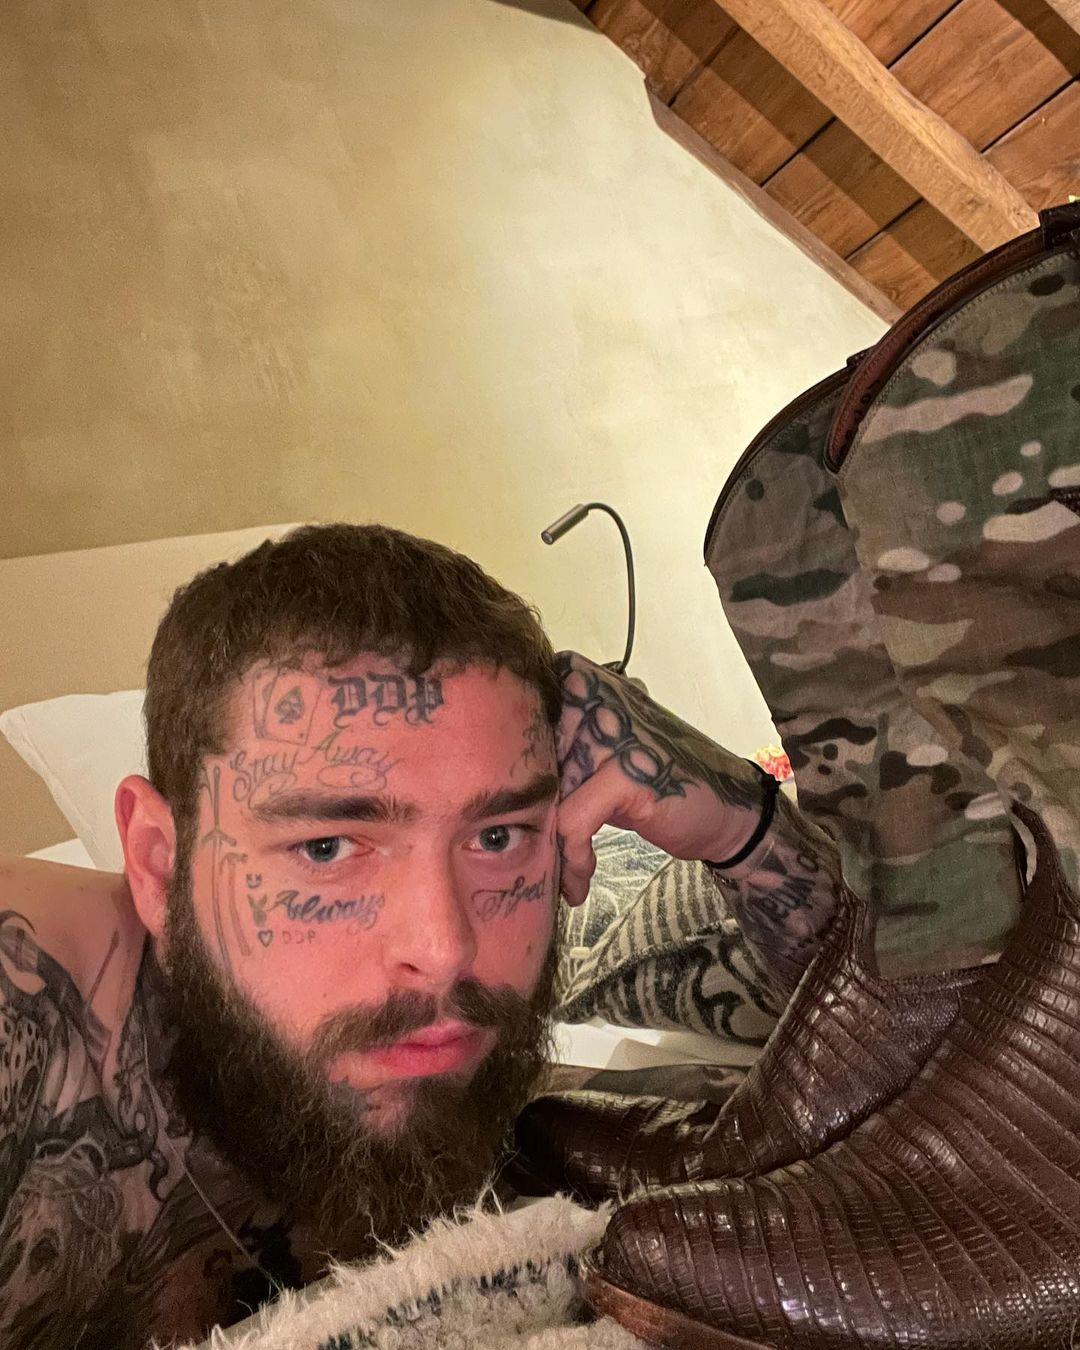 Post Malone Breaks Silence On Weight Loss Concerns From Fans